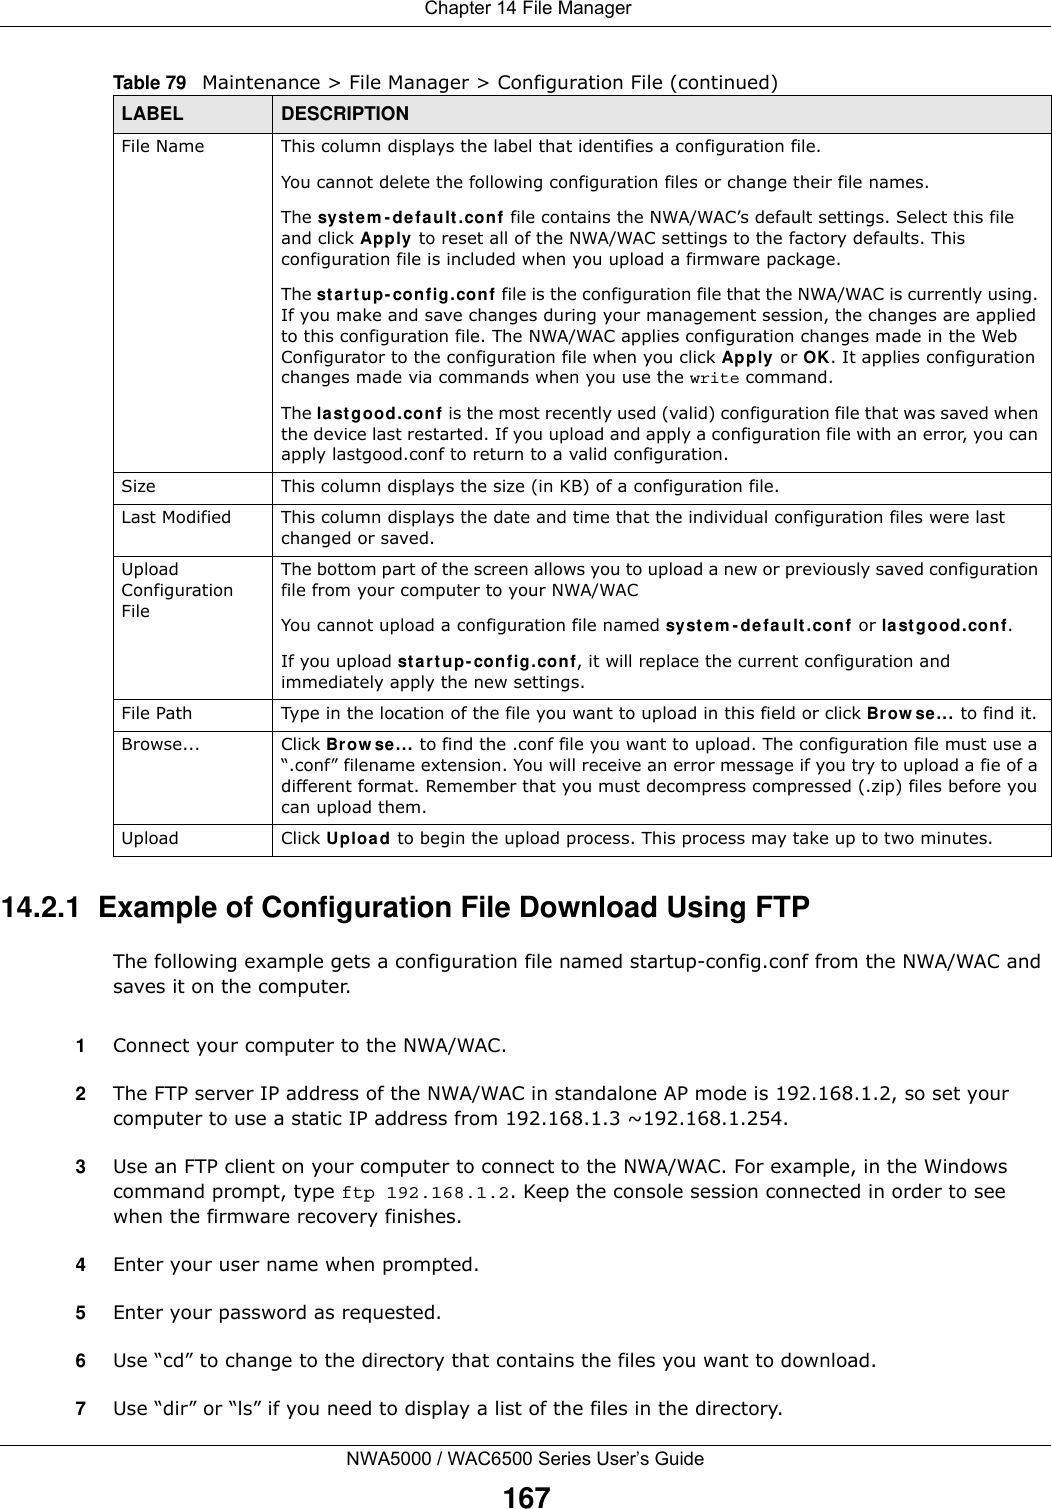  Chapter 14 File ManagerNWA5000 / WAC6500 Series User’s Guide16714.2.1  Example of Configuration File Download Using FTPThe following example gets a configuration file named startup-config.conf from the NWA/WAC and saves it on the computer.1Connect your computer to the NWA/WAC. 2The FTP server IP address of the NWA/WAC in standalone AP mode is 192.168.1.2, so set your computer to use a static IP address from 192.168.1.3 ~192.168.1.254.3Use an FTP client on your computer to connect to the NWA/WAC. For example, in the Windows command prompt, type ftp 192.168.1.2. Keep the console session connected in order to see when the firmware recovery finishes. 4Enter your user name when prompted.5Enter your password as requested.6Use “cd” to change to the directory that contains the files you want to download. 7Use “dir” or “ls” if you need to display a list of the files in the directory.File Name This column displays the label that identifies a configuration file.You cannot delete the following configuration files or change their file names. The syst em - default .con f file contains the NWA/WAC’s default settings. Select this file and click Apply to reset all of the NWA/WAC settings to the factory defaults. This configuration file is included when you upload a firmware package. The st a rt up- config. co nf  file is the configuration file that the NWA/WAC is currently using. If you make and save changes during your management session, the changes are applied to this configuration file. The NWA/WAC applies configuration changes made in the Web Configurator to the configuration file when you click Apply or OK. It applies configuration changes made via commands when you use the write command. The last good.conf is the most recently used (valid) configuration file that was saved when the device last restarted. If you upload and apply a configuration file with an error, you can apply lastgood.conf to return to a valid configuration.Size This column displays the size (in KB) of a configuration file.Last Modified This column displays the date and time that the individual configuration files were last changed or saved.Upload Configuration FileThe bottom part of the screen allows you to upload a new or previously saved configuration file from your computer to your NWA/WACYou cannot upload a configuration file named sy st e m - d efa u lt . conf or last g oo d. co nf. If you upload st a r t u p- config. co nf, it will replace the current configuration and immediately apply the new settings.File Path  Type in the location of the file you want to upload in this field or click Br ow se ... to find it.Browse...  Click Brow se ... to find the .conf file you want to upload. The configuration file must use a “.conf” filename extension. You will receive an error message if you try to upload a fie of a different format. Remember that you must decompress compressed (.zip) files before you can upload them. Upload  Click Upload to begin the upload process. This process may take up to two minutes. Table 79   Maintenance &gt; File Manager &gt; Configuration File (continued)LABEL DESCRIPTION